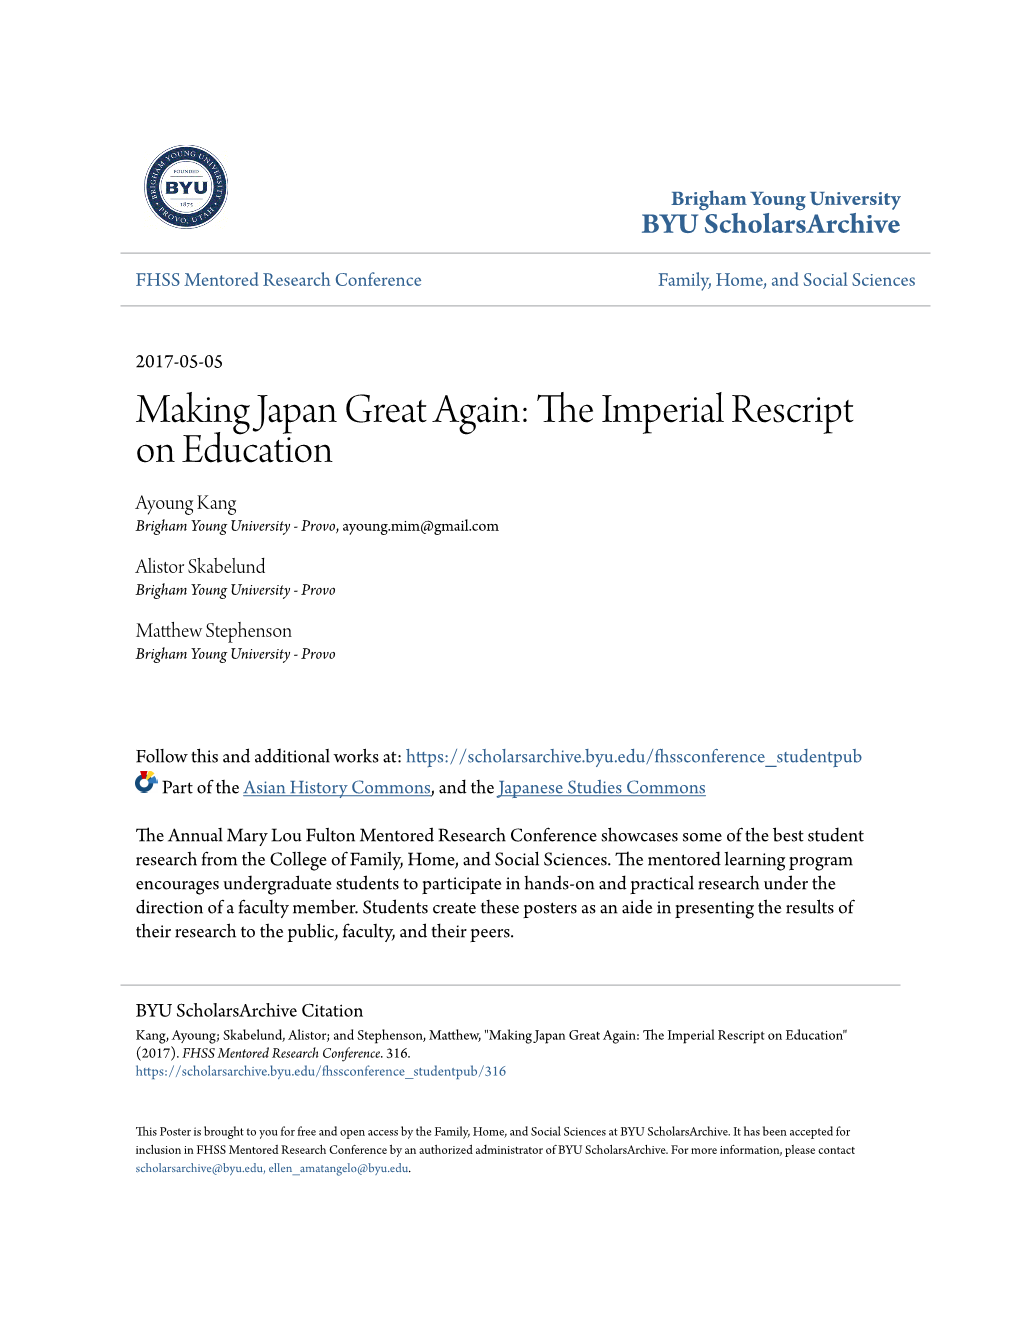 The Imperial Rescript on Education